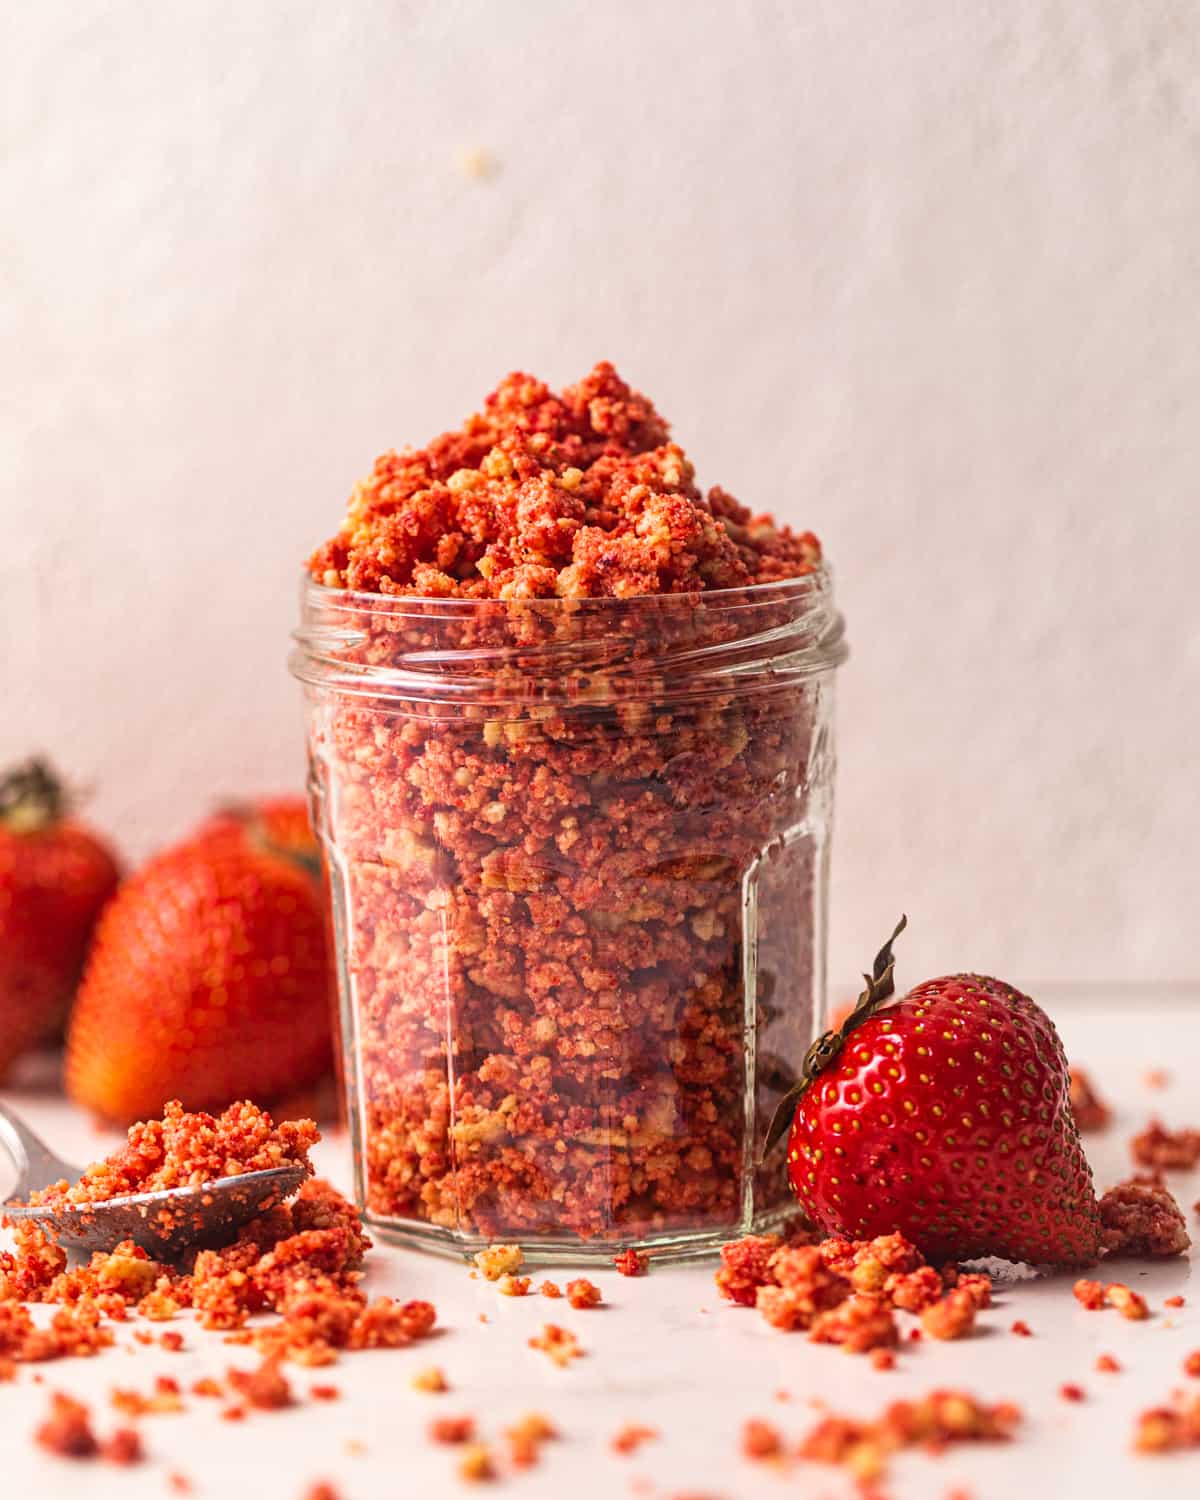 strawberry crumbles in a glass jar.